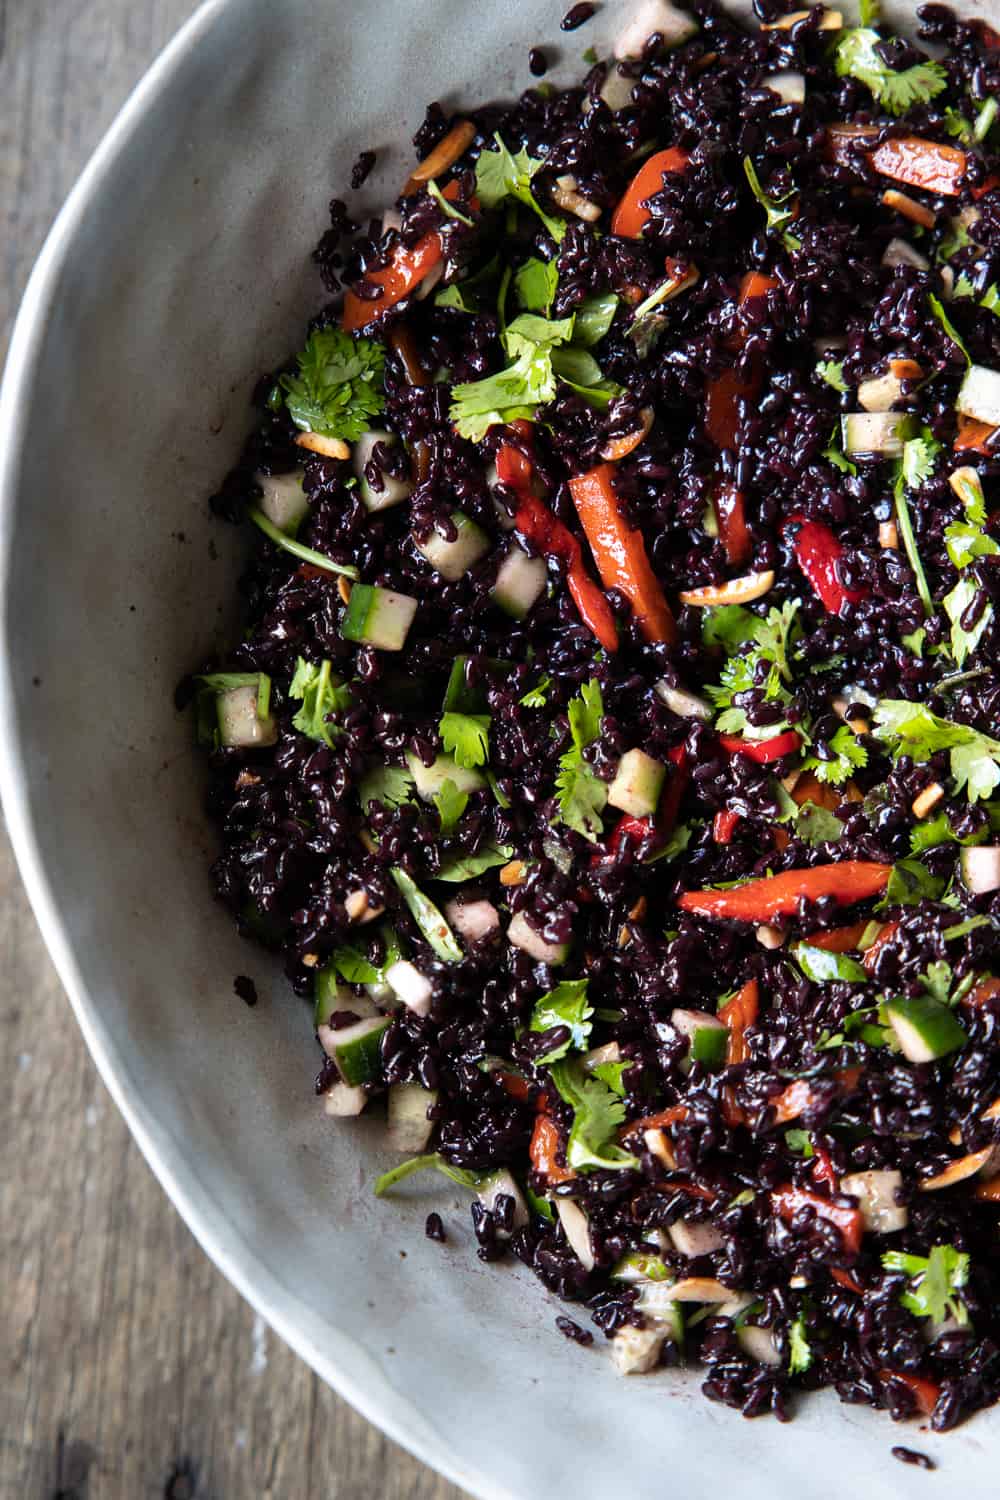 Close up of the black rice salad from above